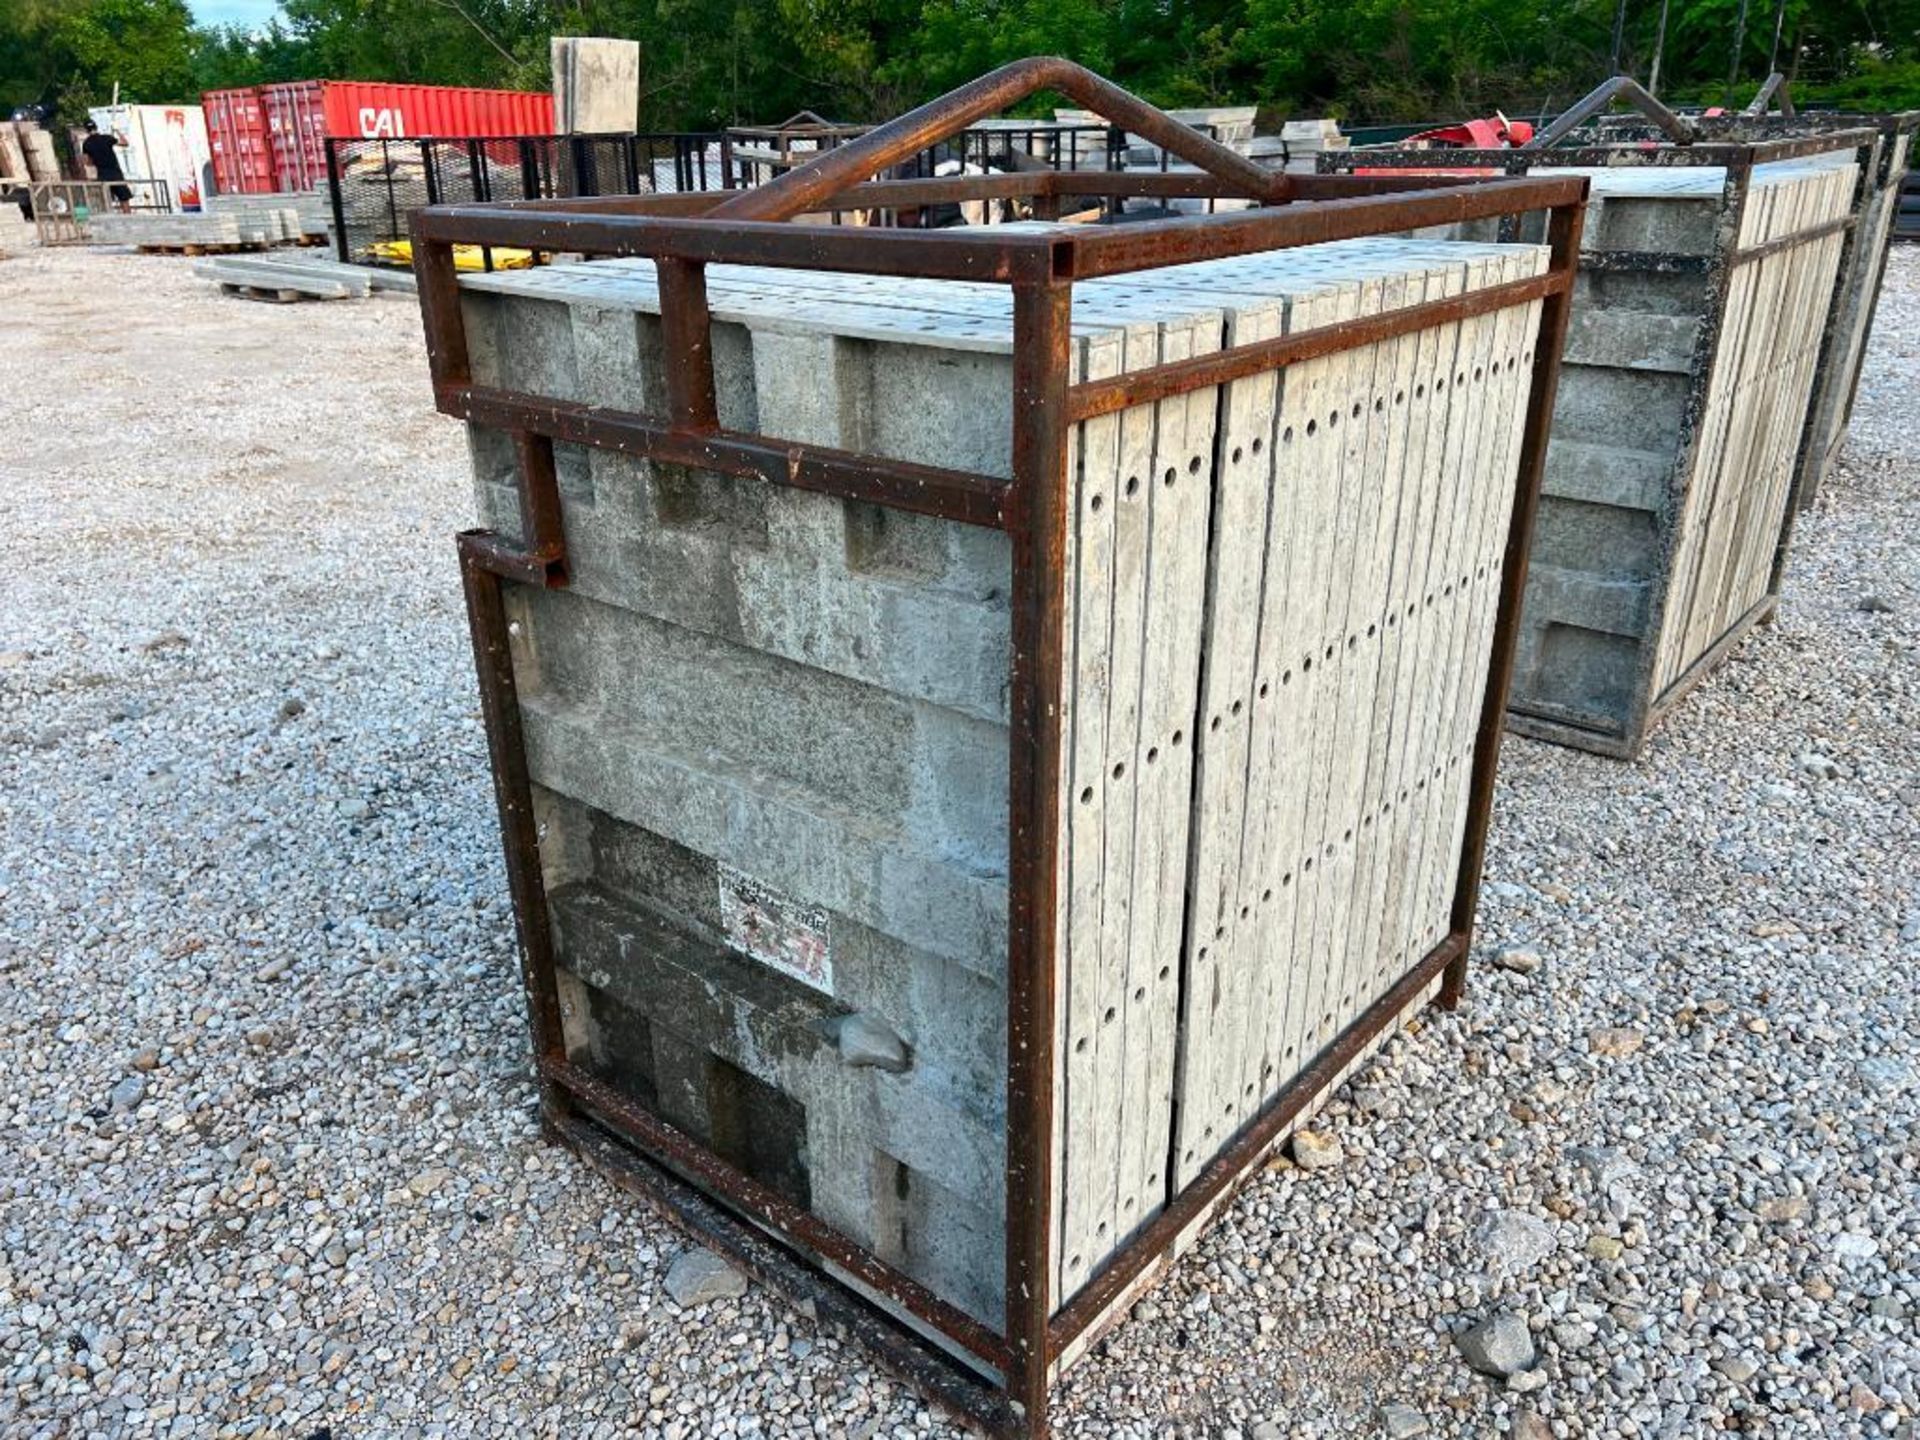 (20) 3' x 4' Leco Aluminum Concrete Forms, 6-12 Hole Pattern in Basket. Located in Eureka, MO. - Image 3 of 4